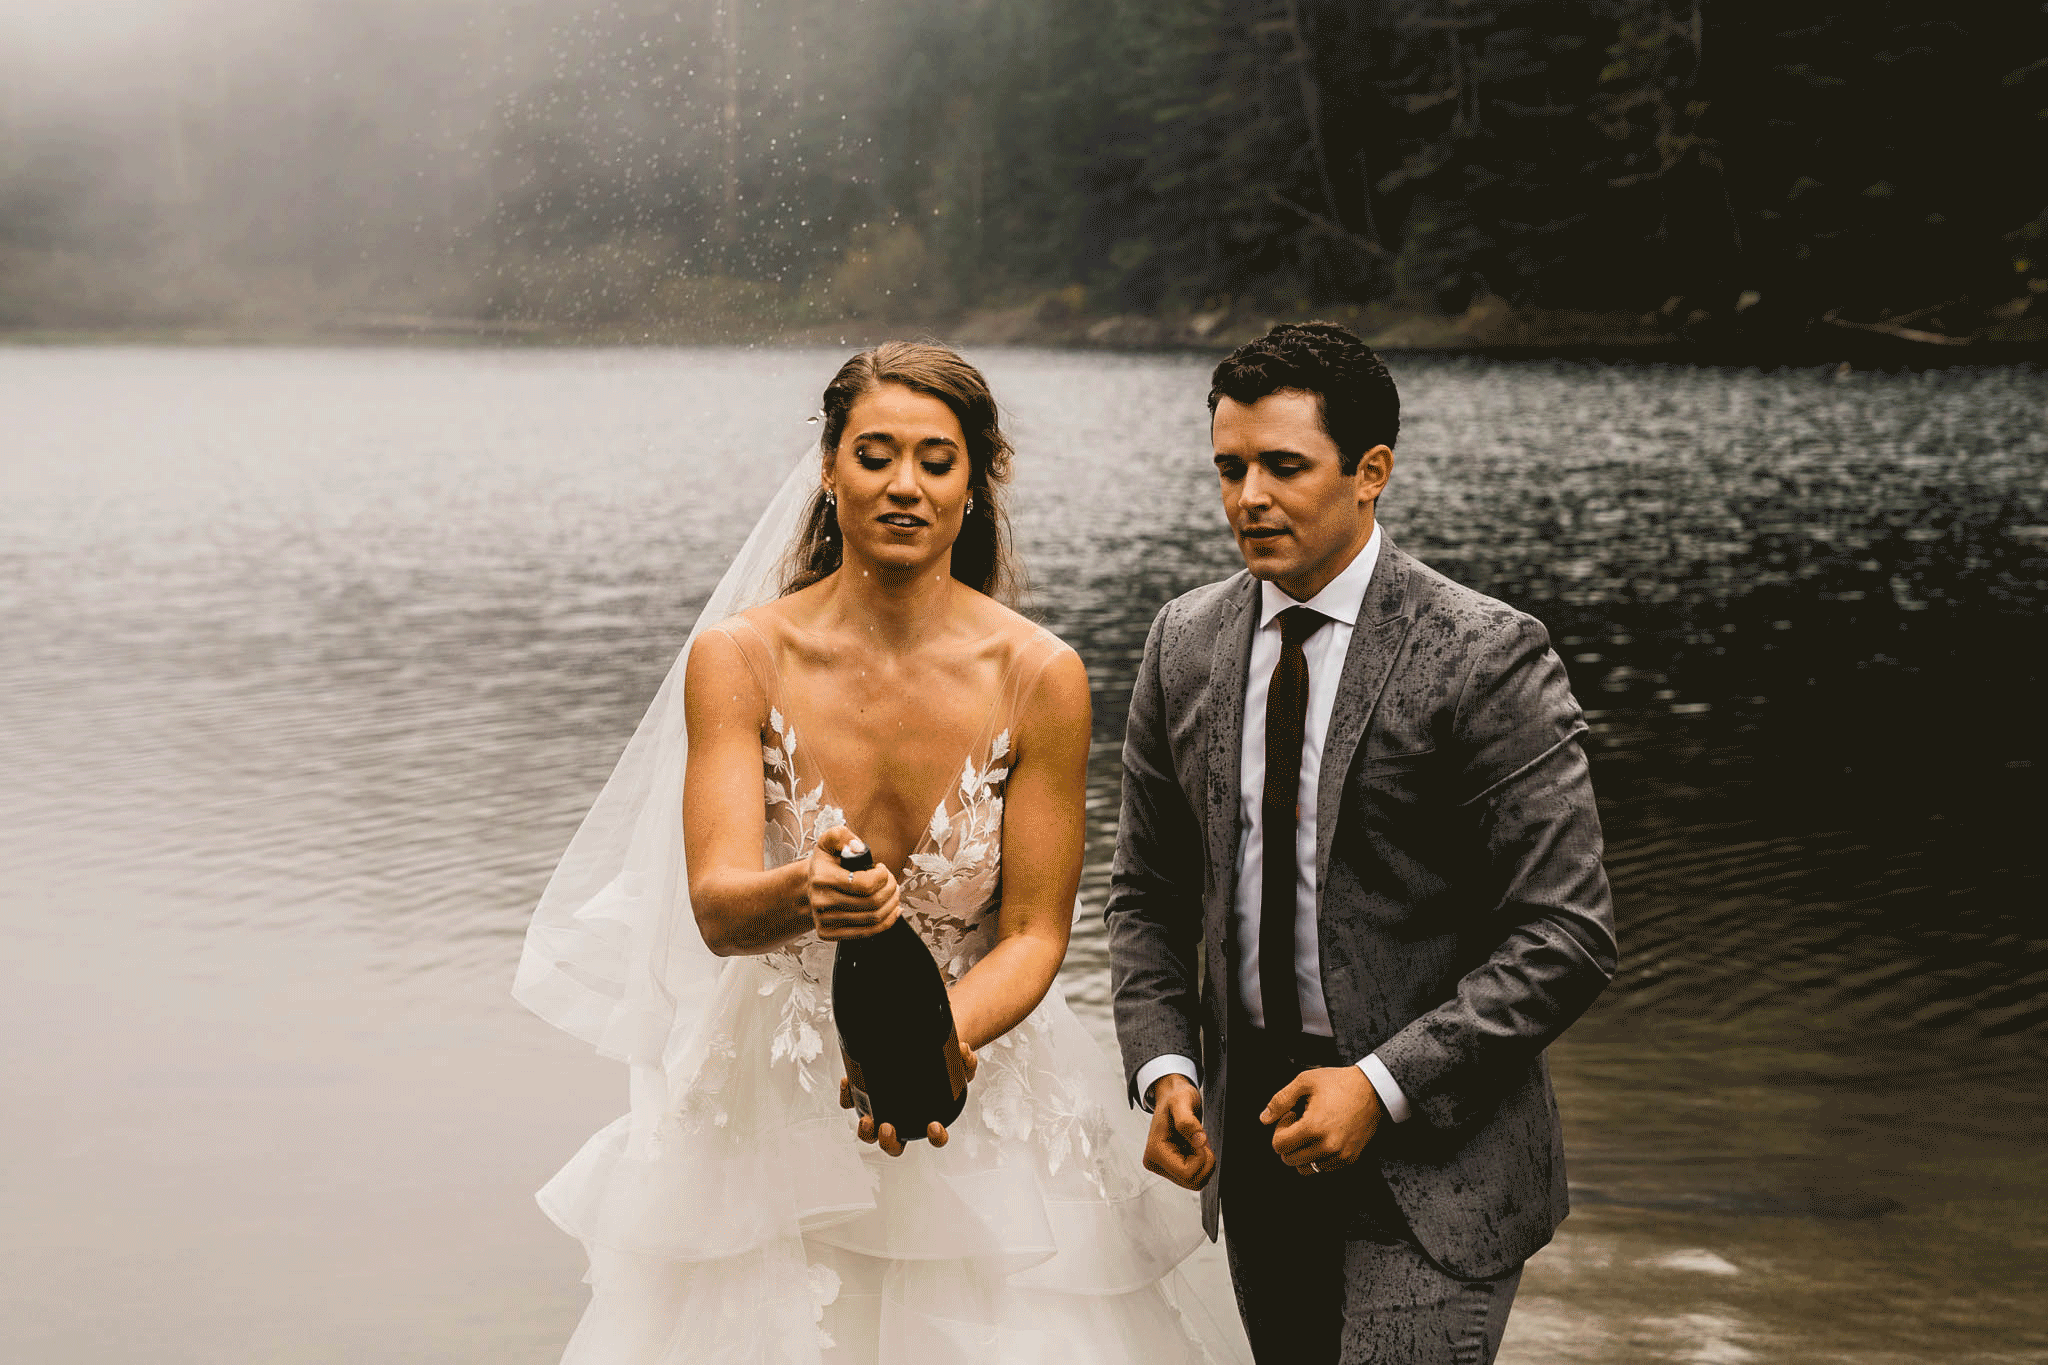 A bride sprays champagne and it accidentally sprays the groom in his face